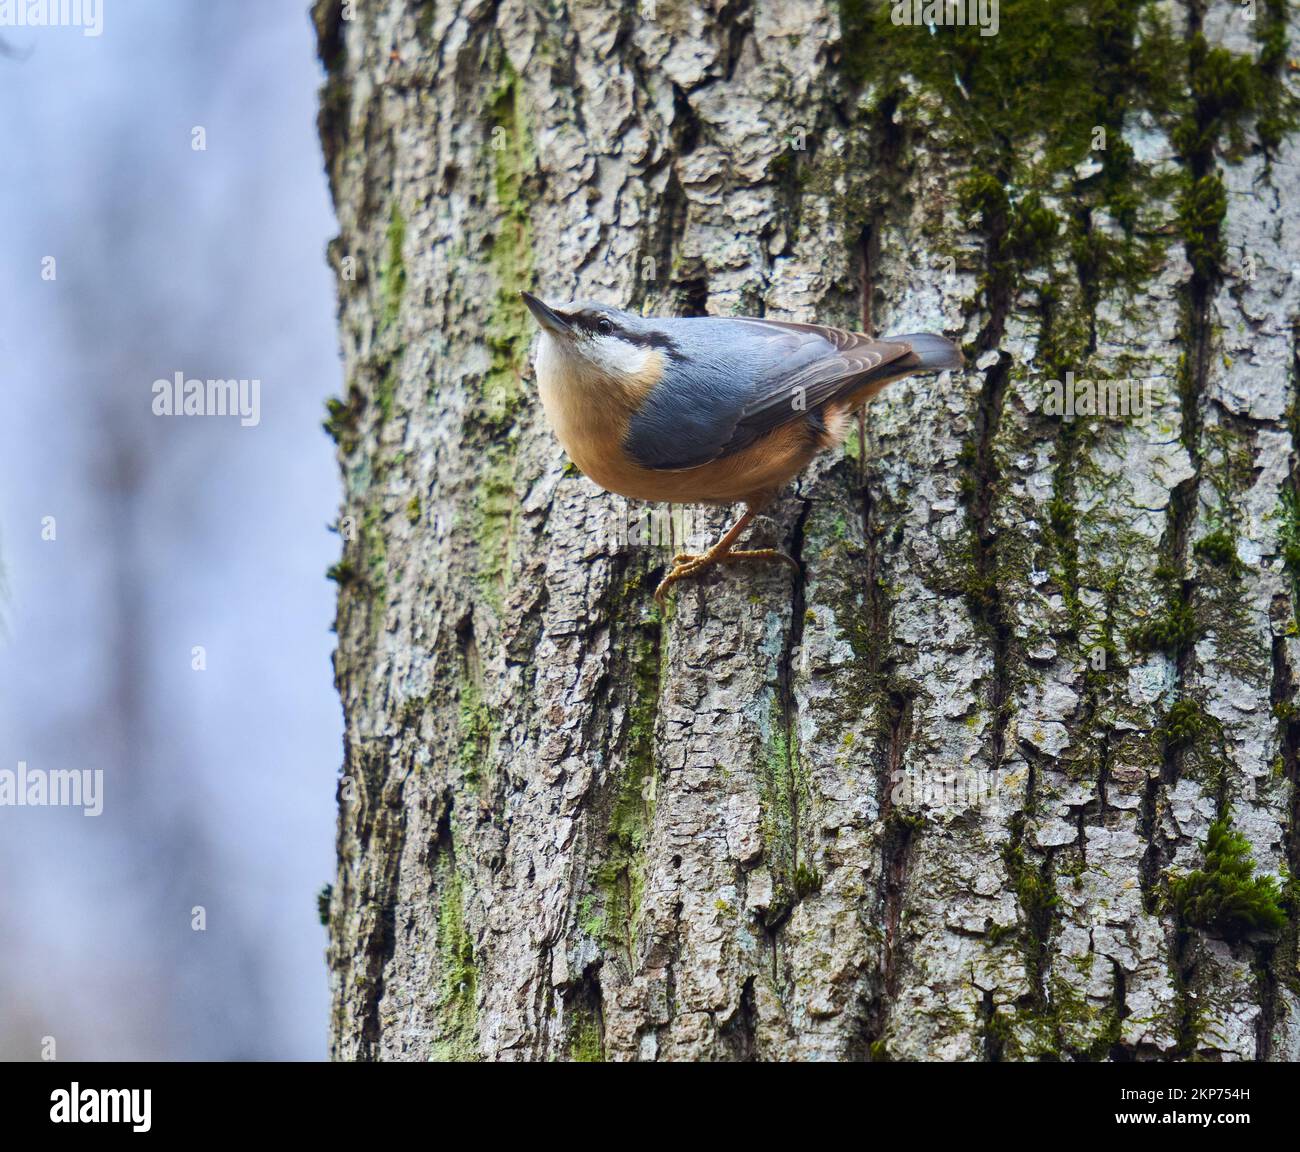 European nuthatch (Sitta europaea) perched on a tree Stock Photo